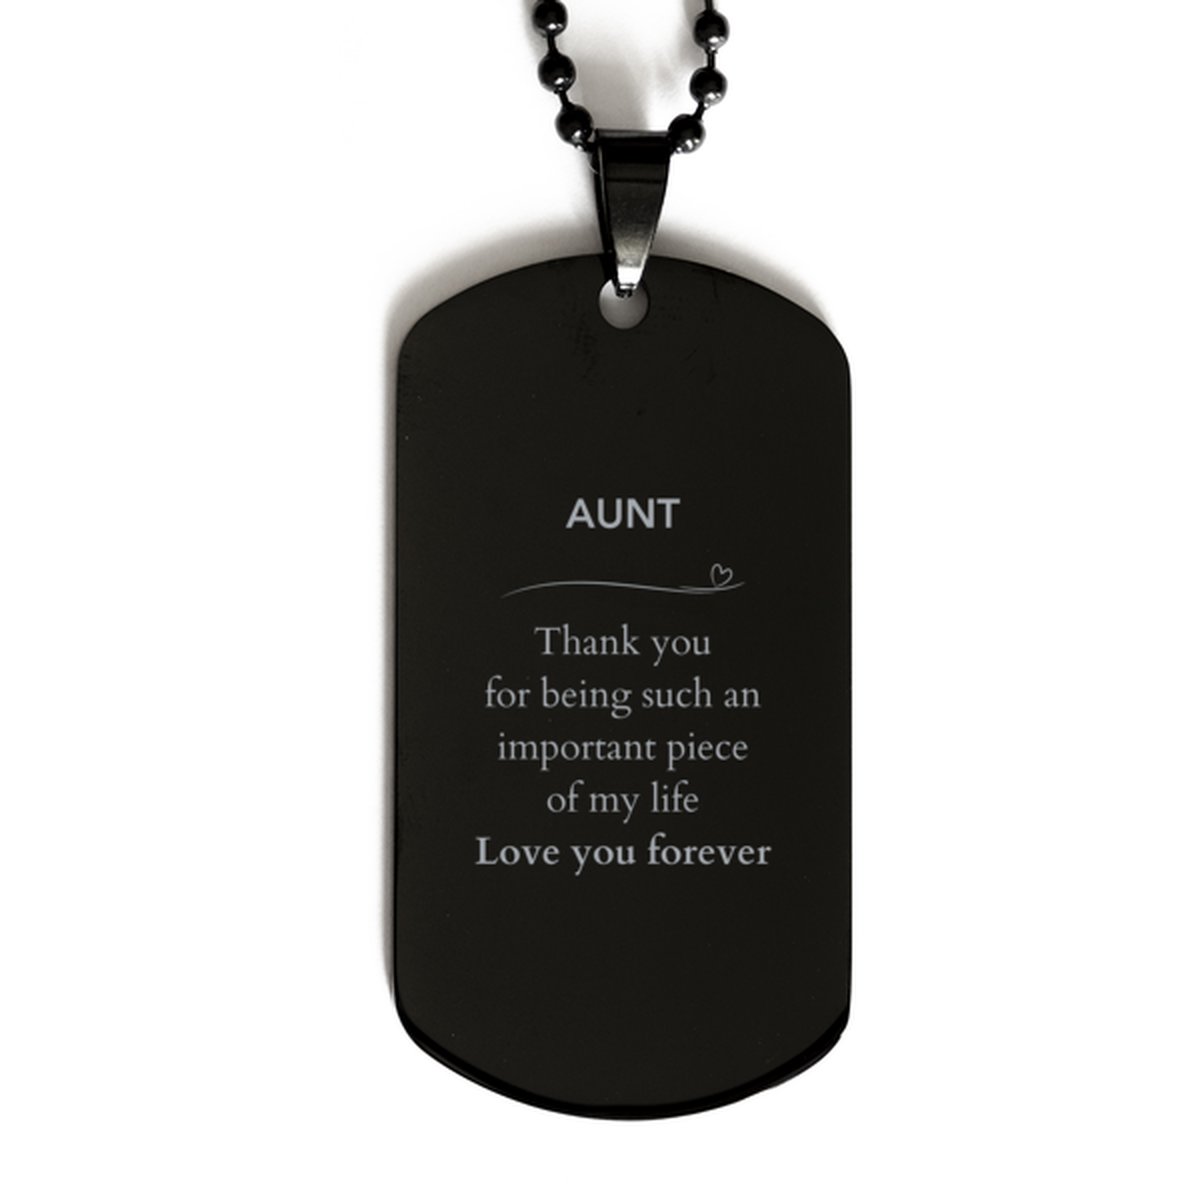 Appropriate Aunt Black Dog Tag Epic Birthday Gifts for Aunt Thank you for being such an important piece of my life Aunt Christmas Mothers Fathers Day